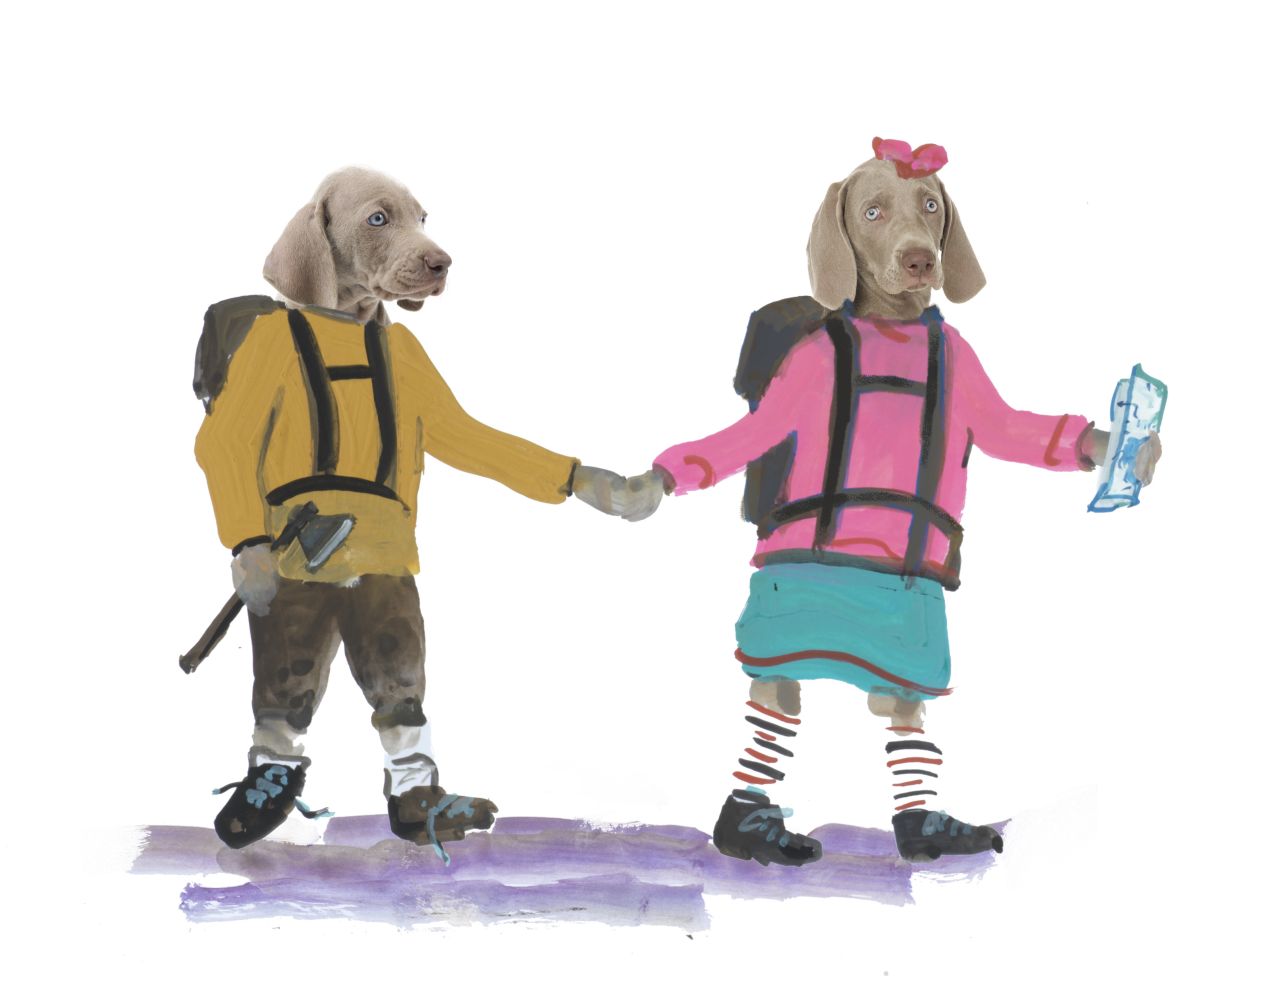 Dogs, mainly Weimaraners, have been persistent muses in William Wegman's artwork, and his latest picture book "Flo & Wendell Explore" is no exception. Click through the gallery for more examples of how dogs have made their mark on Wegman's career.